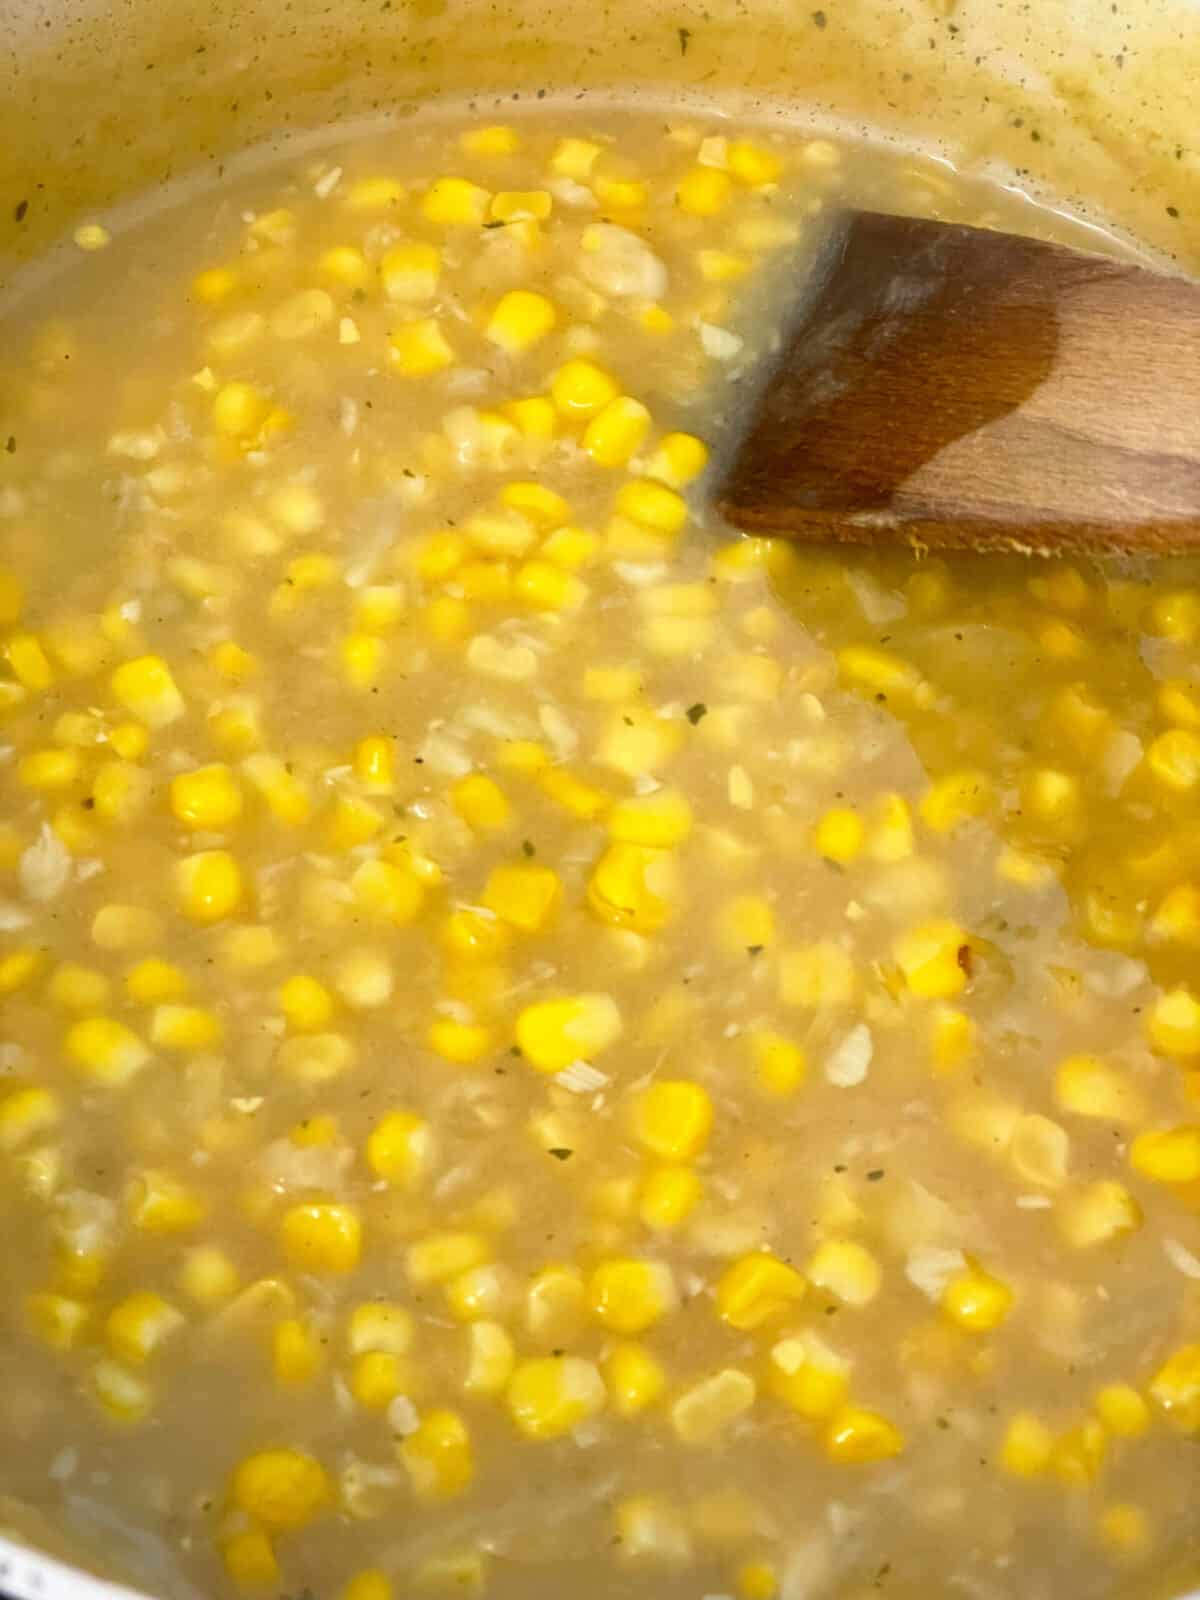 Creamed corn soup cooked and ready to be blended.